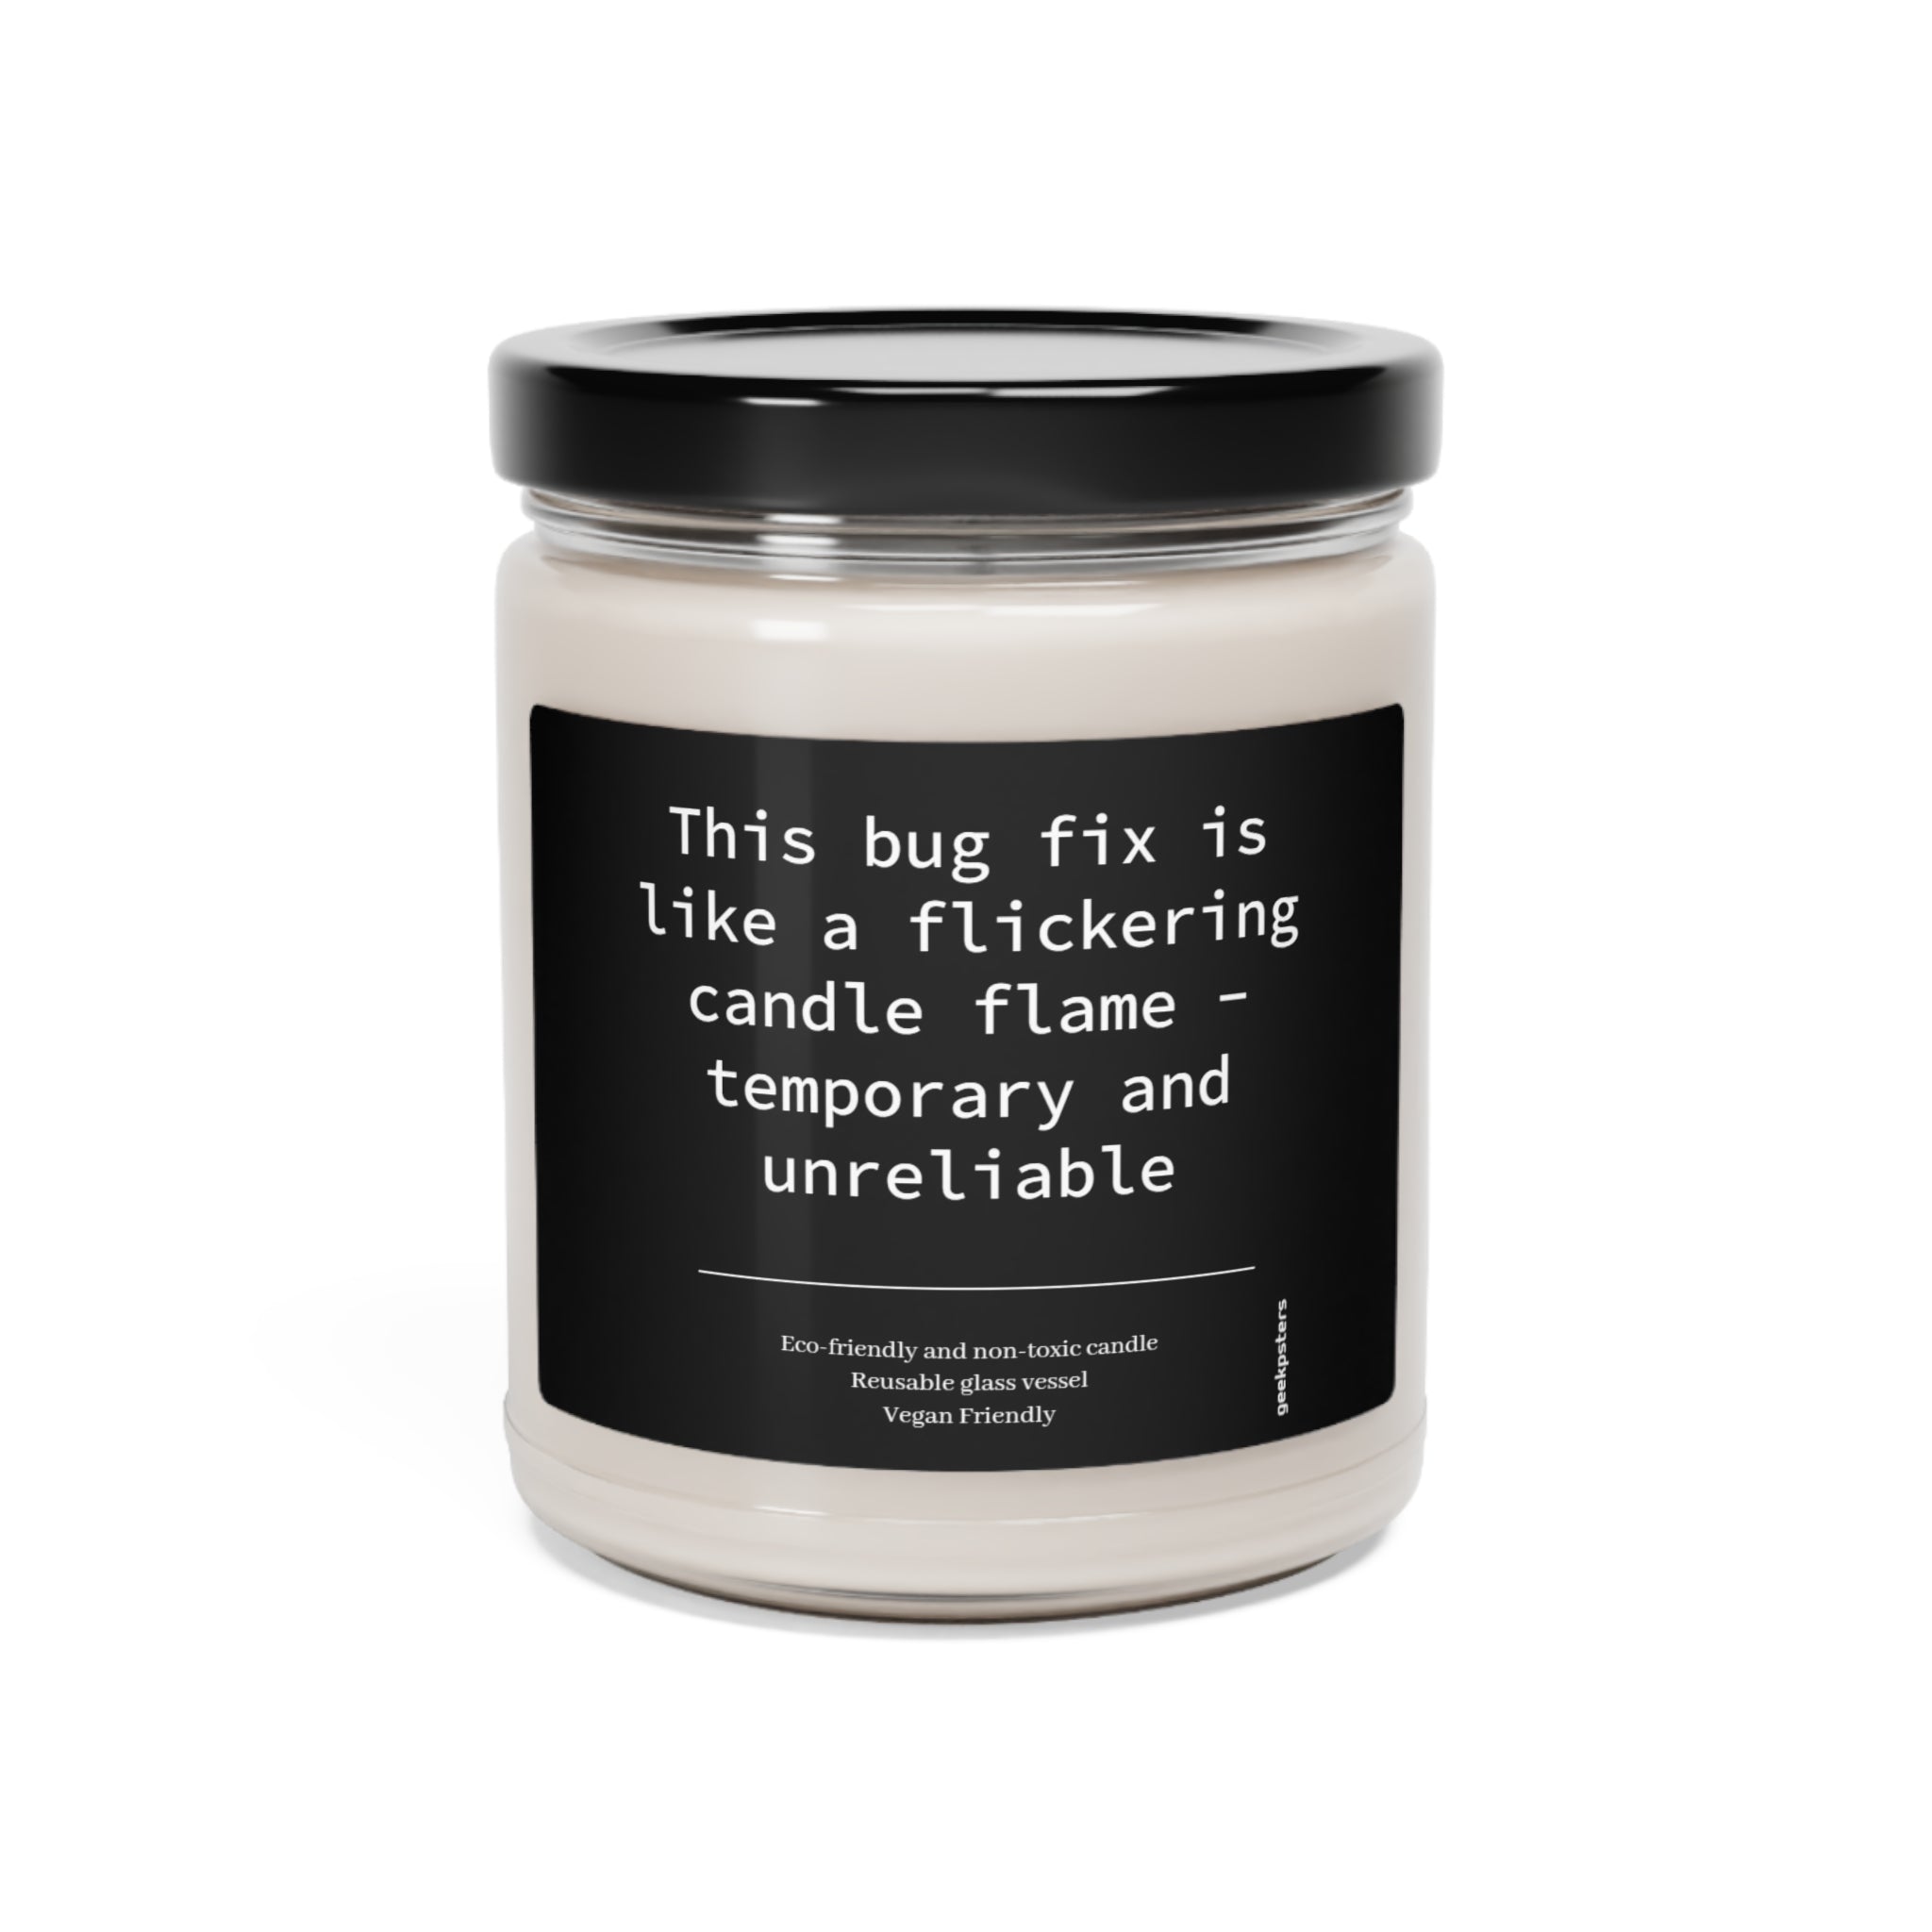 A scented candle with a humorous label comparing This Bug Fix is Like a Flame to a flickering candle flame, noting its temporary and unreliable nature, and highlighting its eco-friendly and vegan-friendly properties. Made with a natural